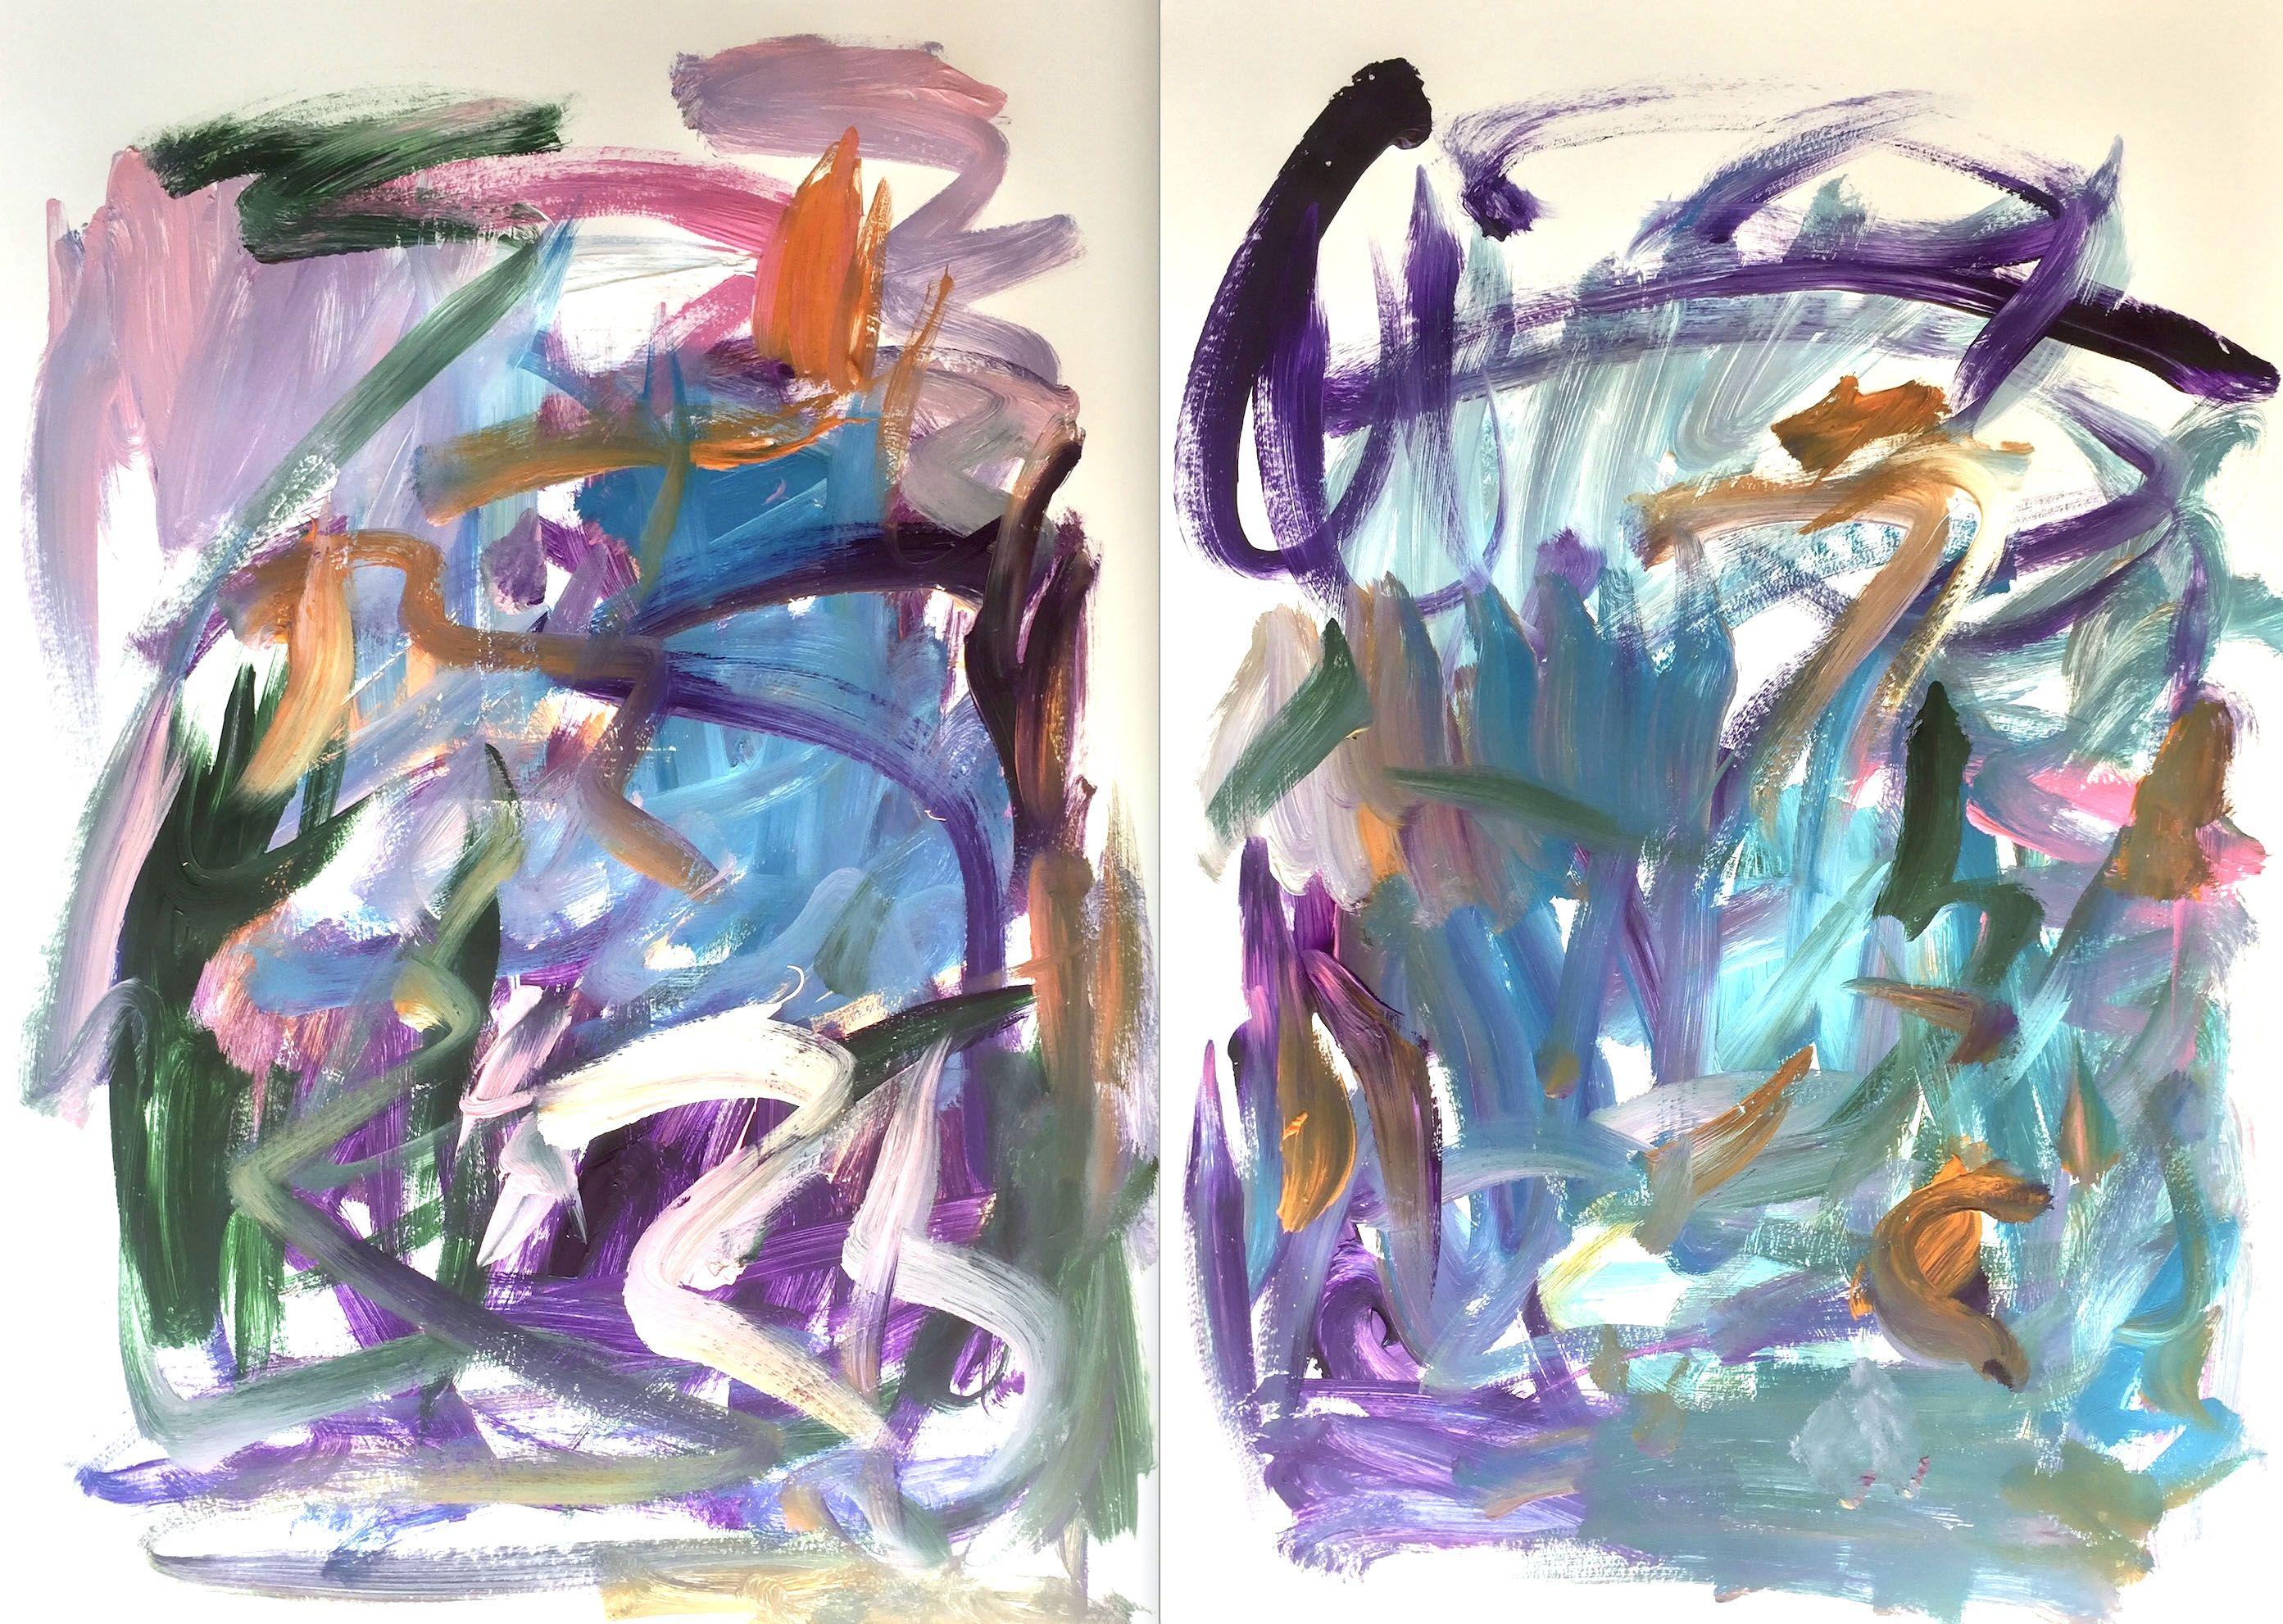 "Should I Stay (Diptych)" is a lively, colorful diptych on paper. It is painted gesturally and dynamically and is part of abstract expressionism.    The main colors are turquoise, blue, purple, green and red.    The two pictures can be hung together